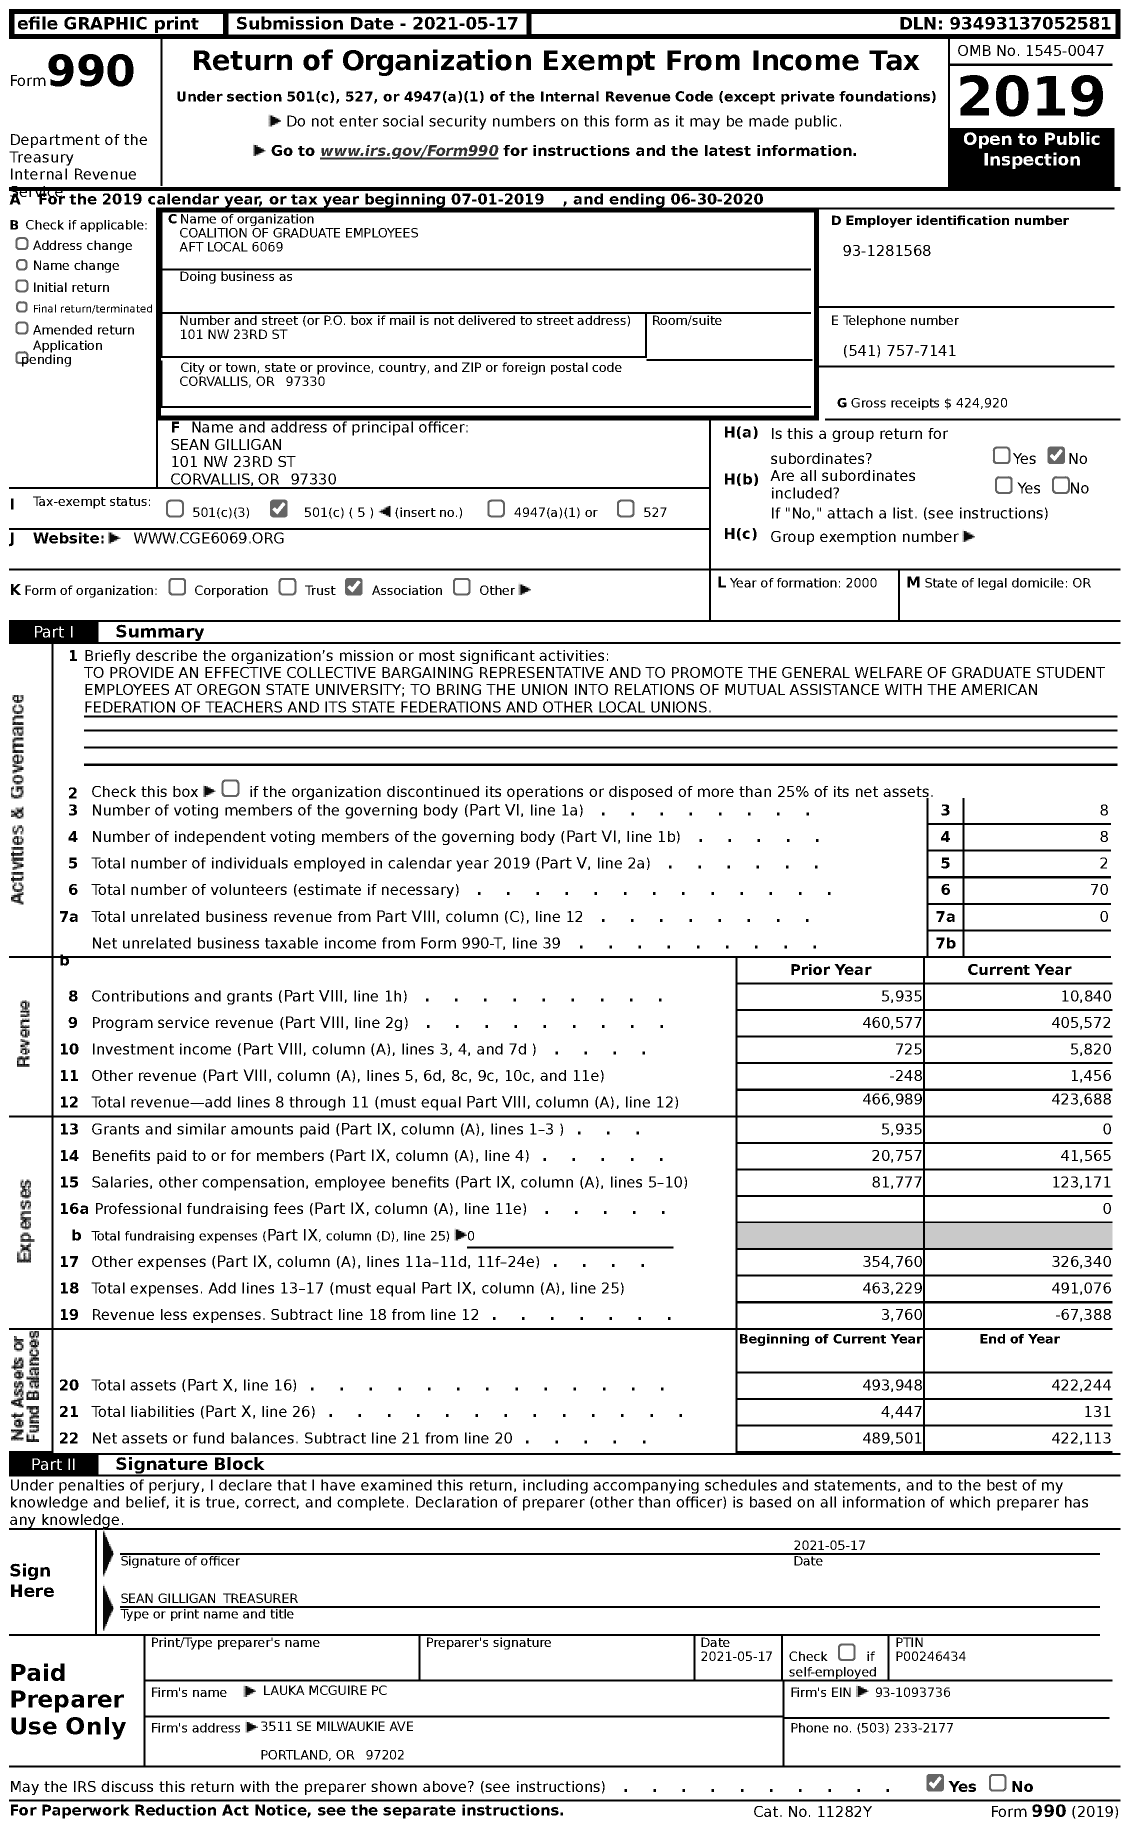 Image of first page of 2019 Form 990 for American Federation of Teachers - 6069 Coalition of Graduate Employee